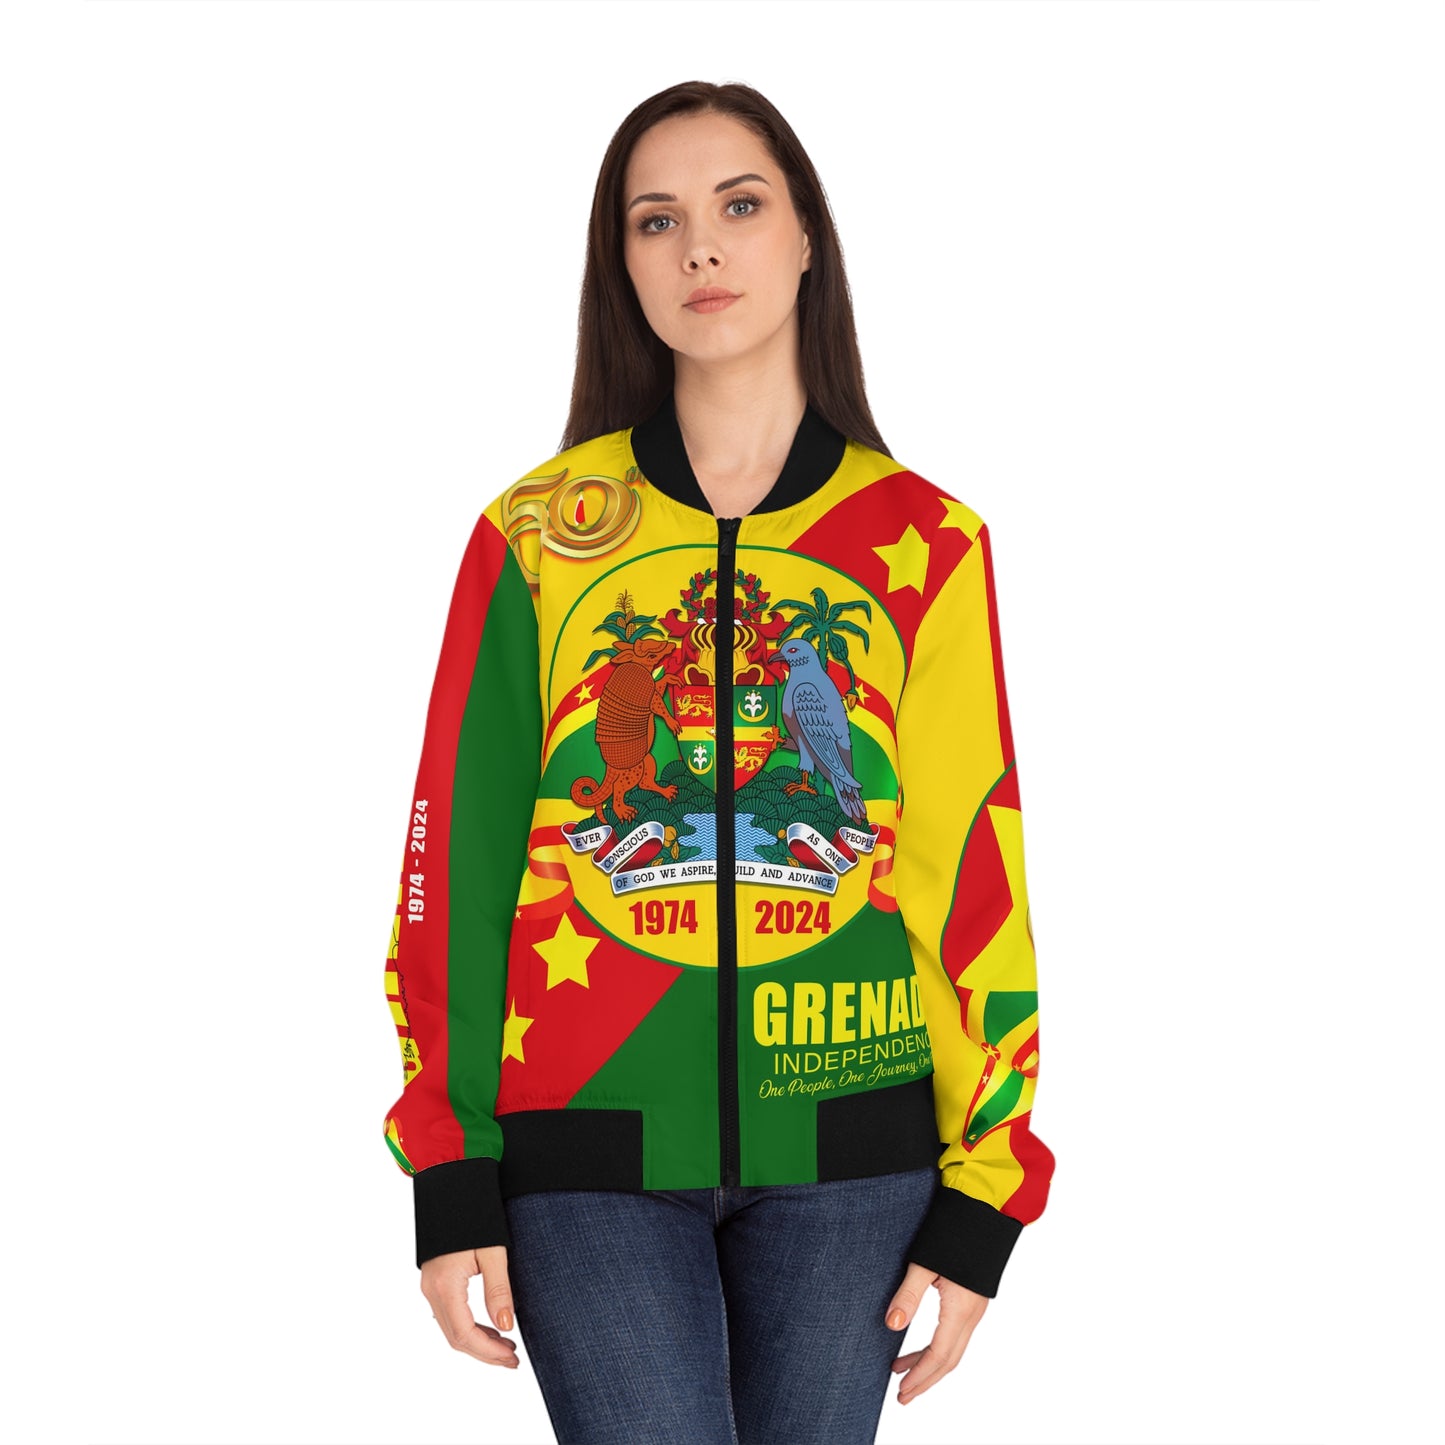 LADIES Grenada 50th Independence Day Bomber Jacket